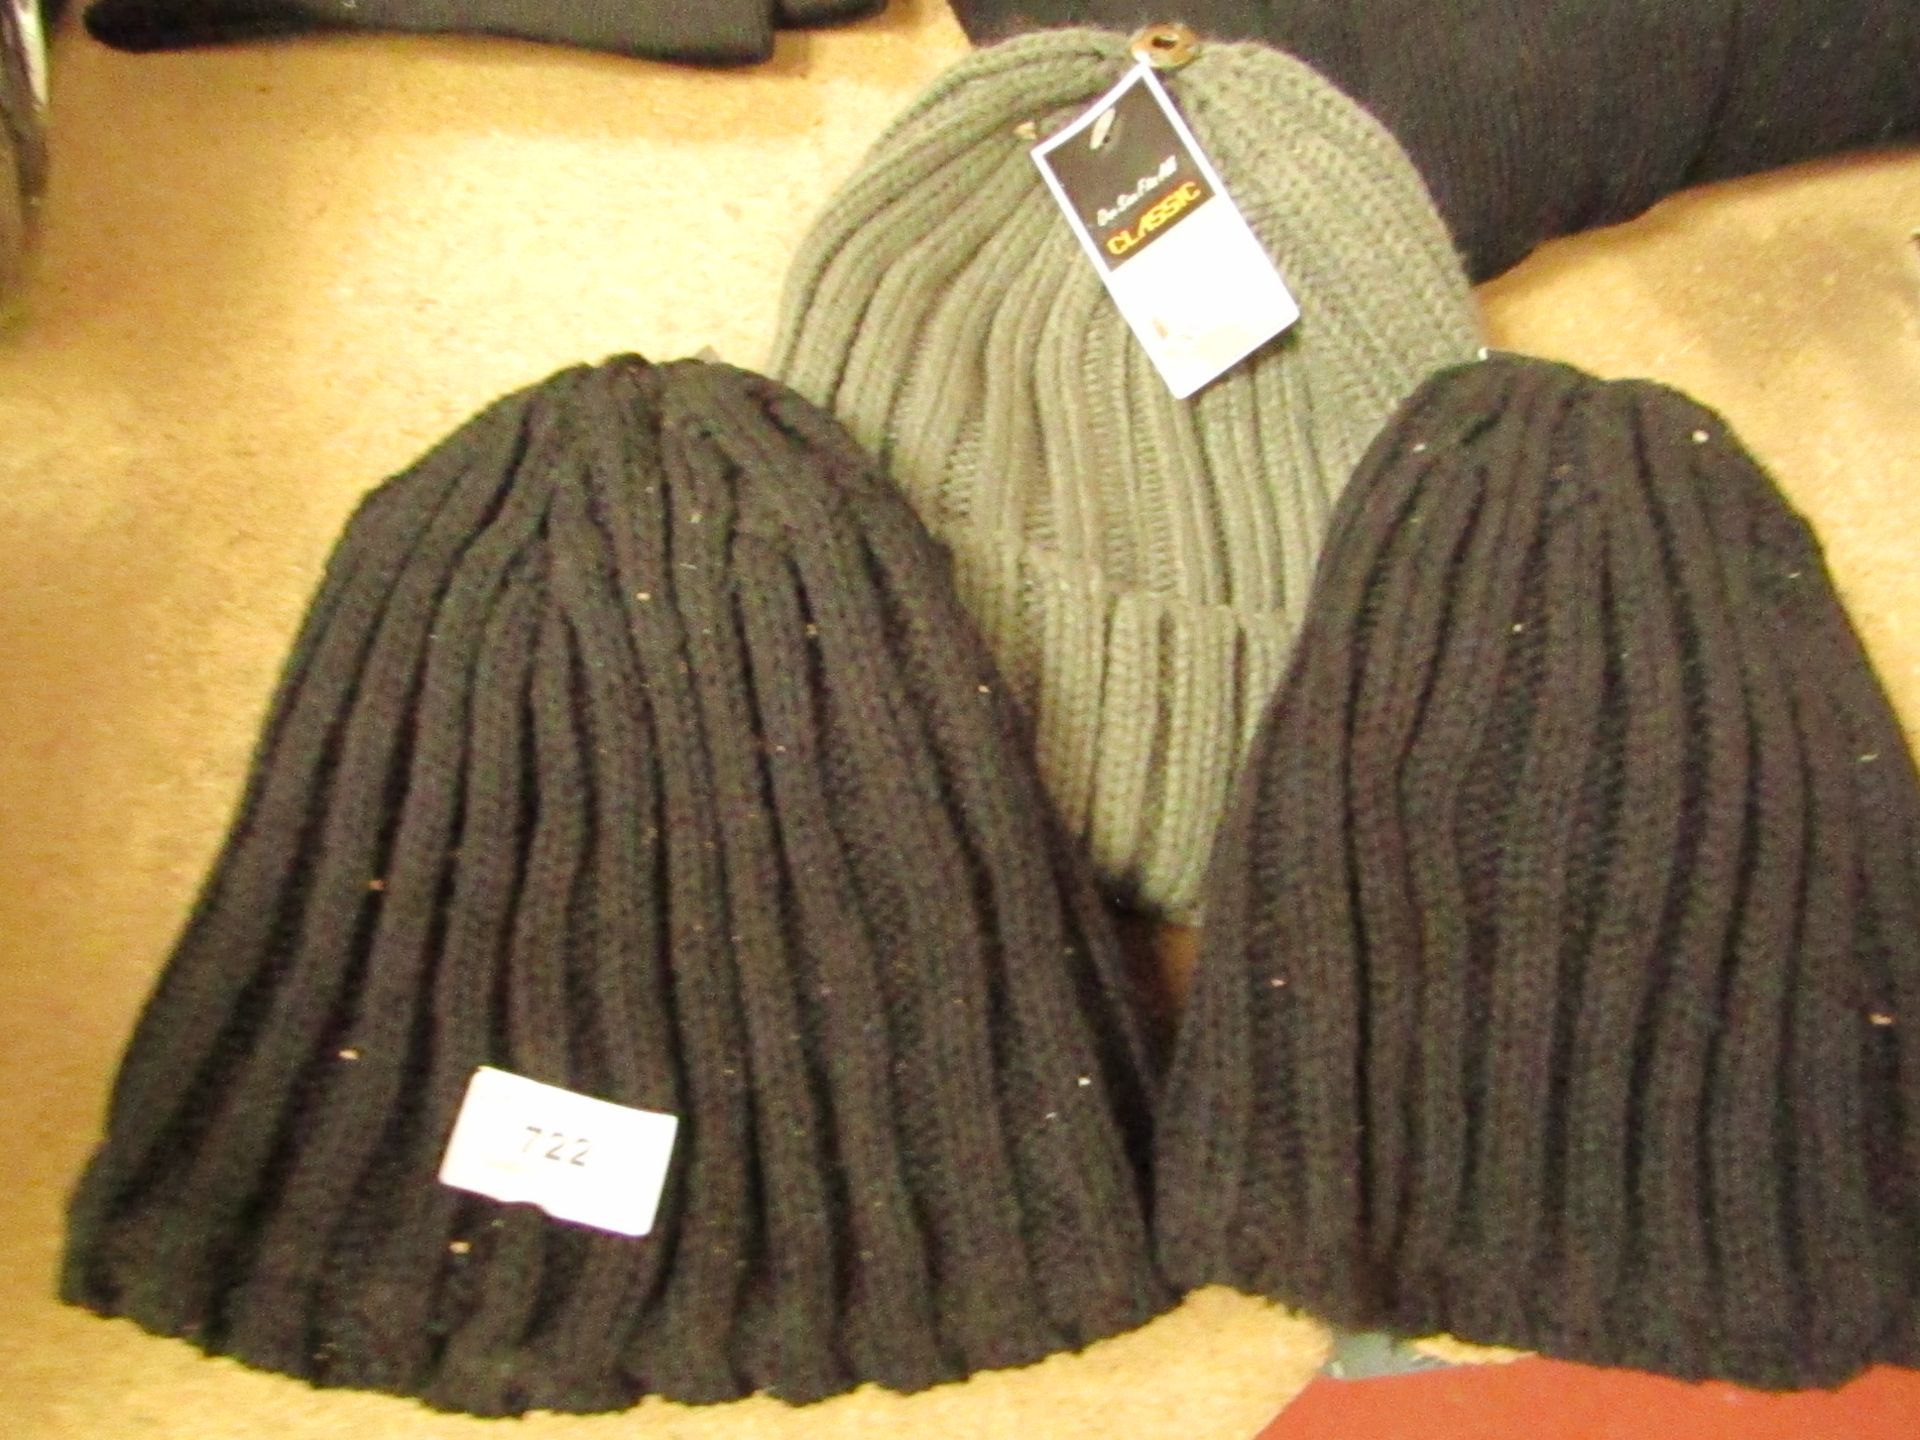 5 items of Knit wear being 3 x Chunky Hats & 2 x Scarves (some with tags)